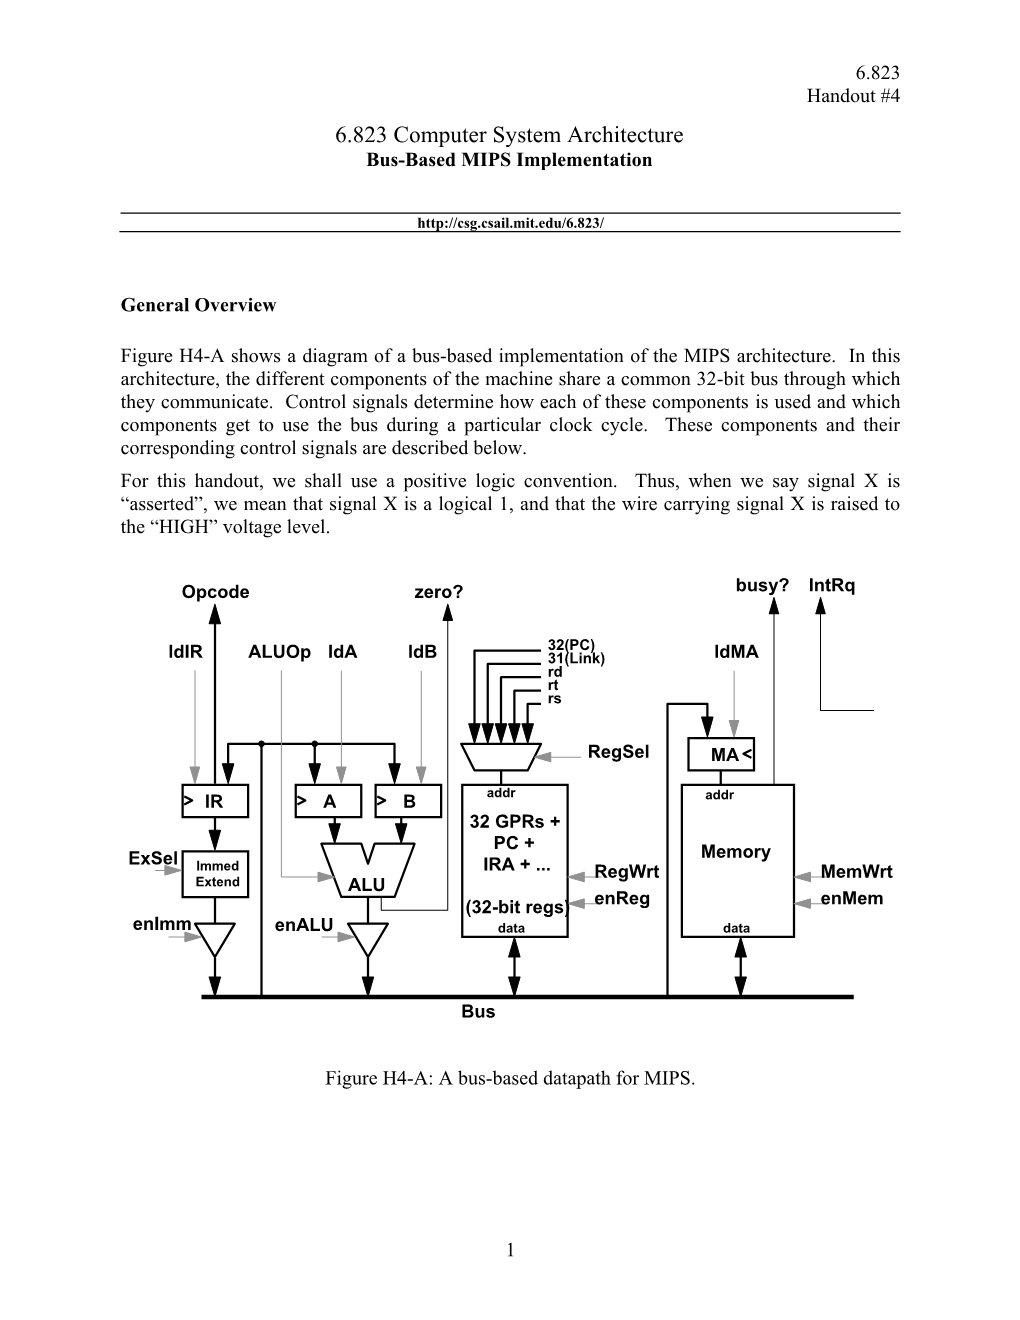 MIPS Bus-Based Architecture